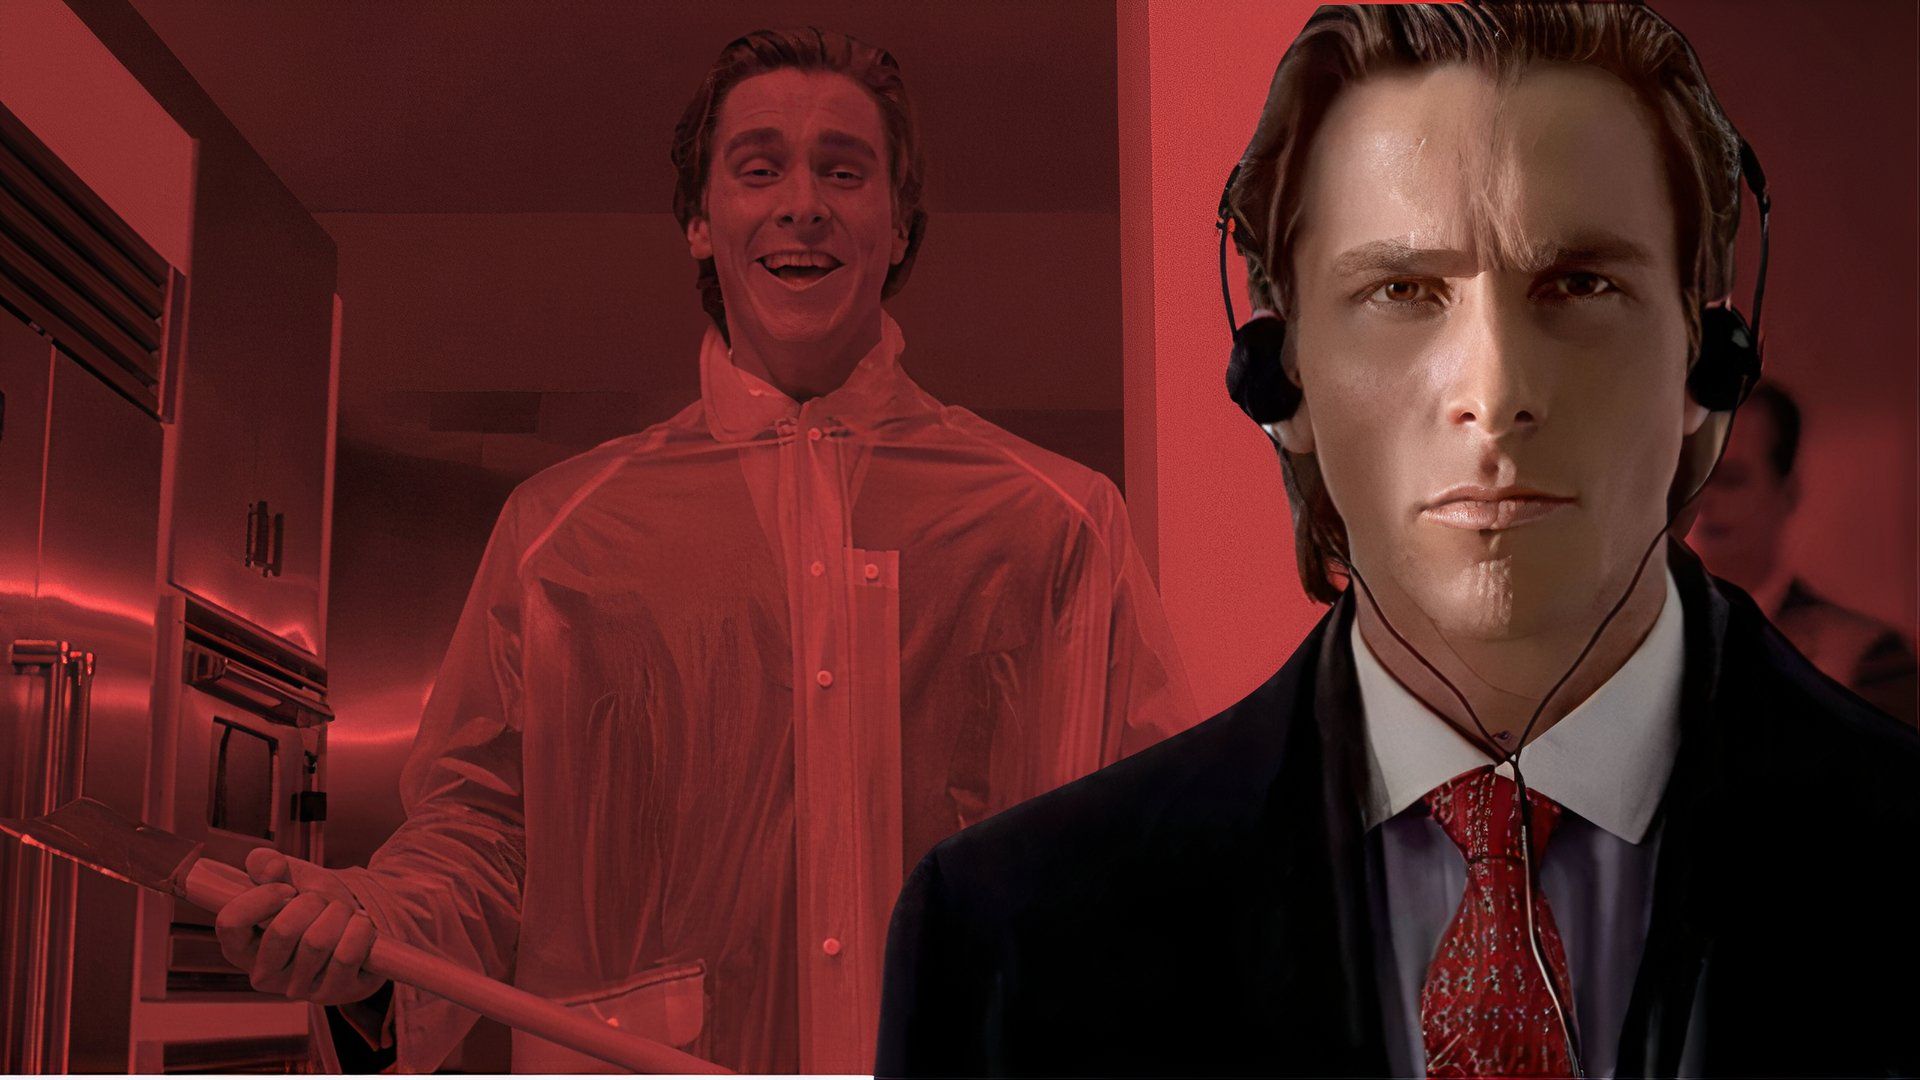 9 scenes from the book “American Psycho” that didn’t appear in the film